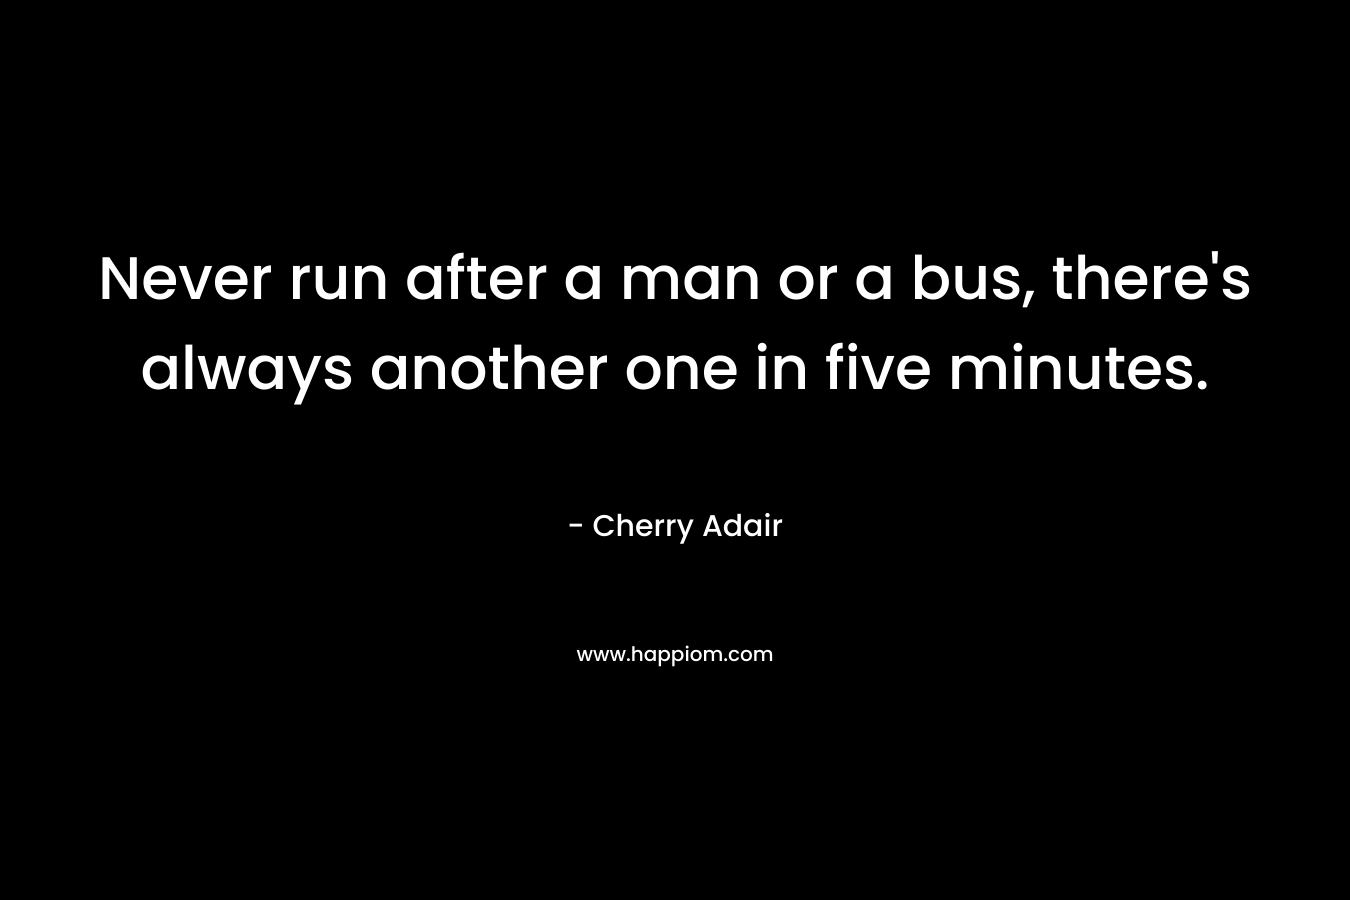 Never run after a man or a bus, there’s always another one in five minutes. – Cherry Adair